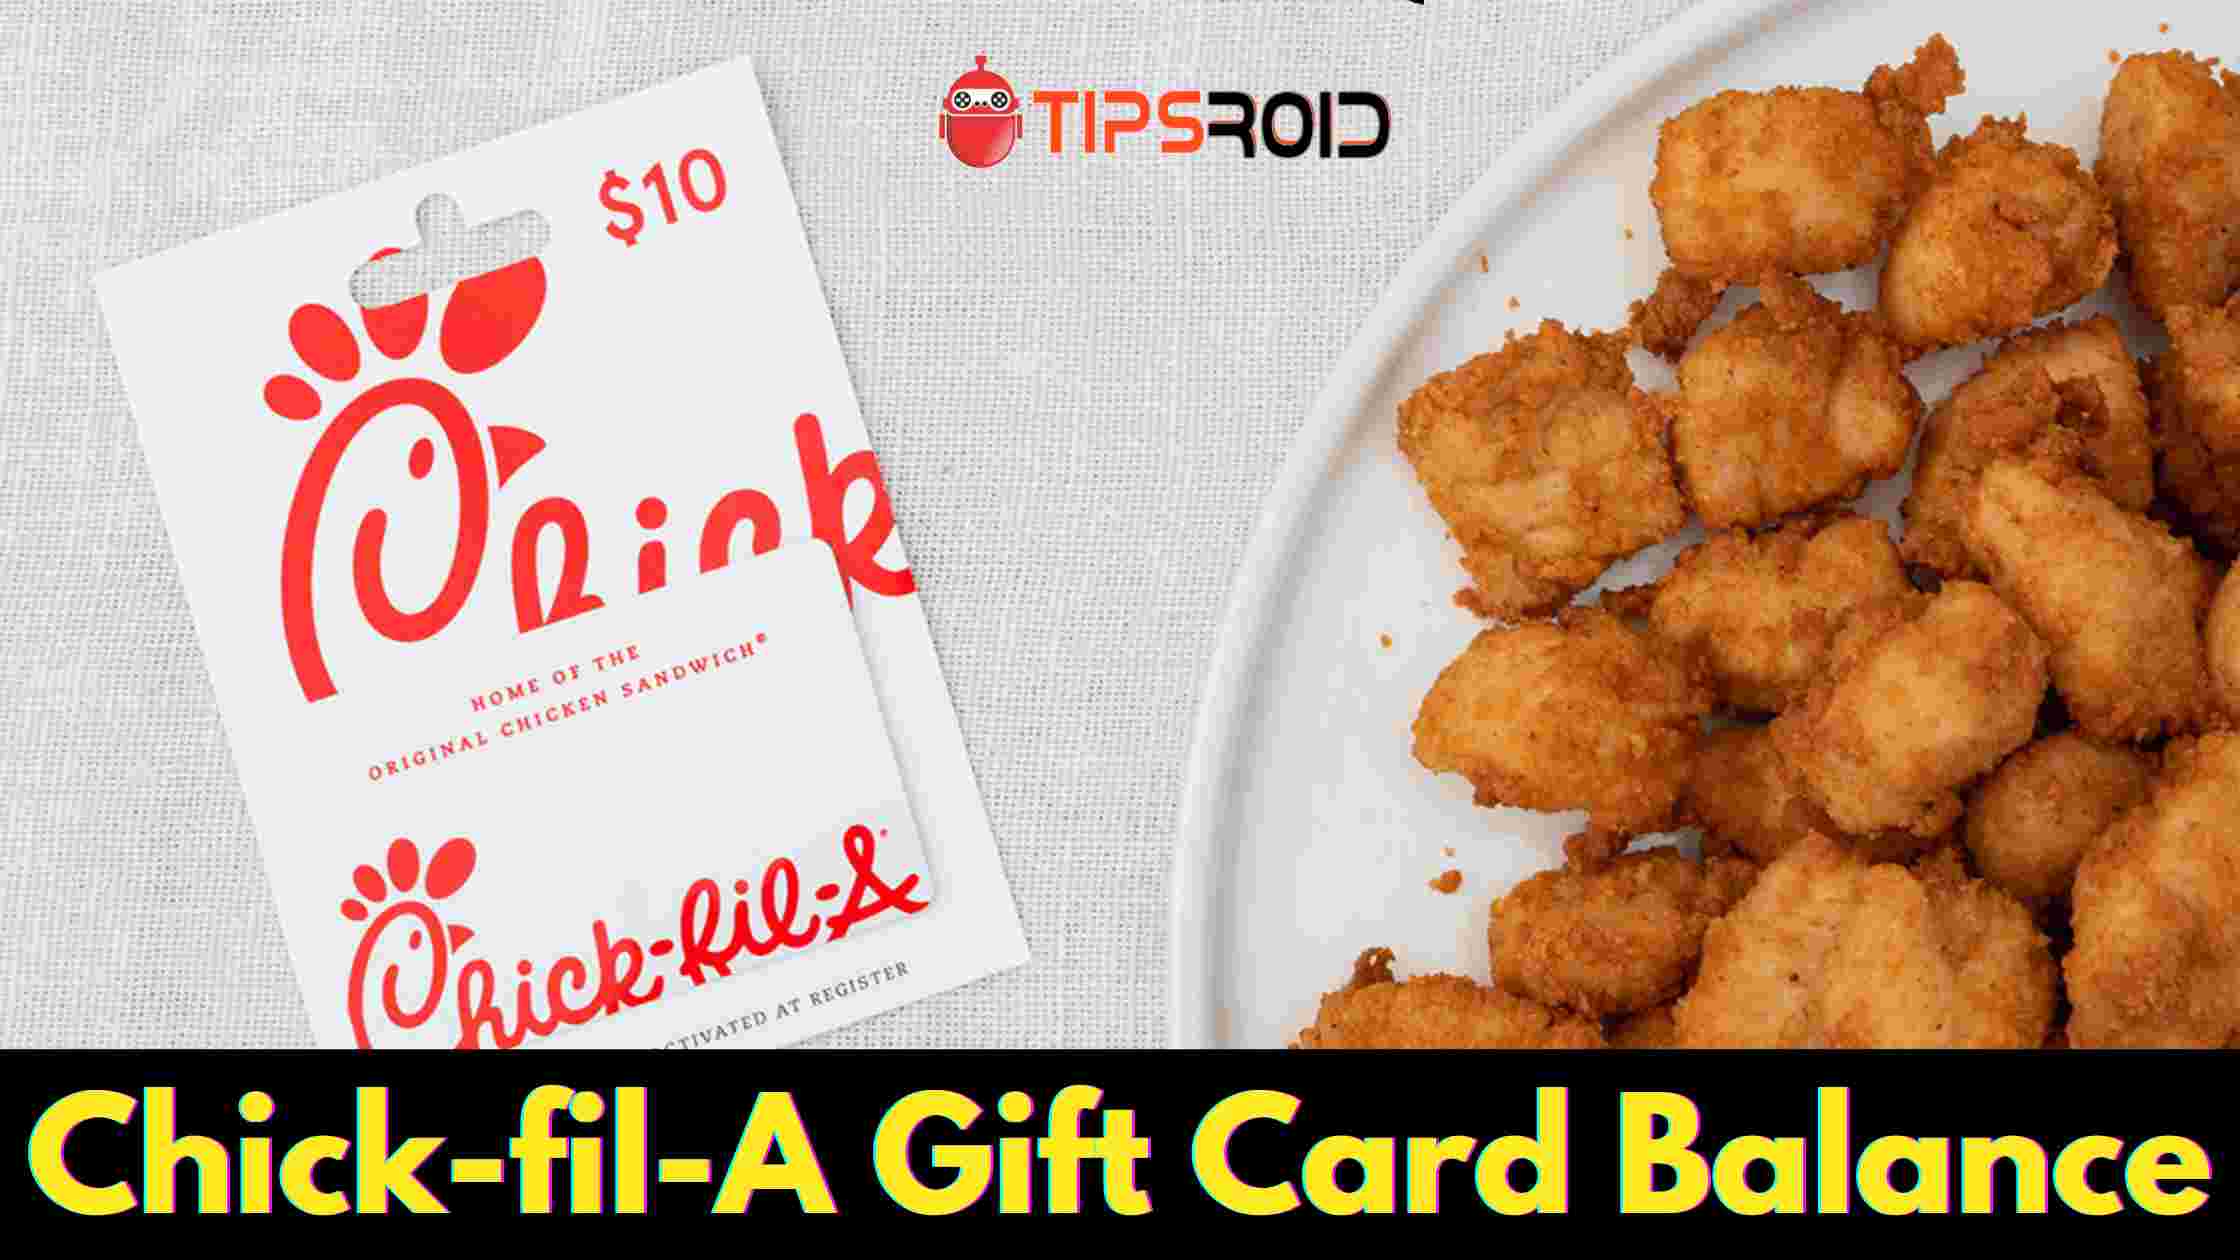 How to Check Chick-fil-A Gift Card Balance